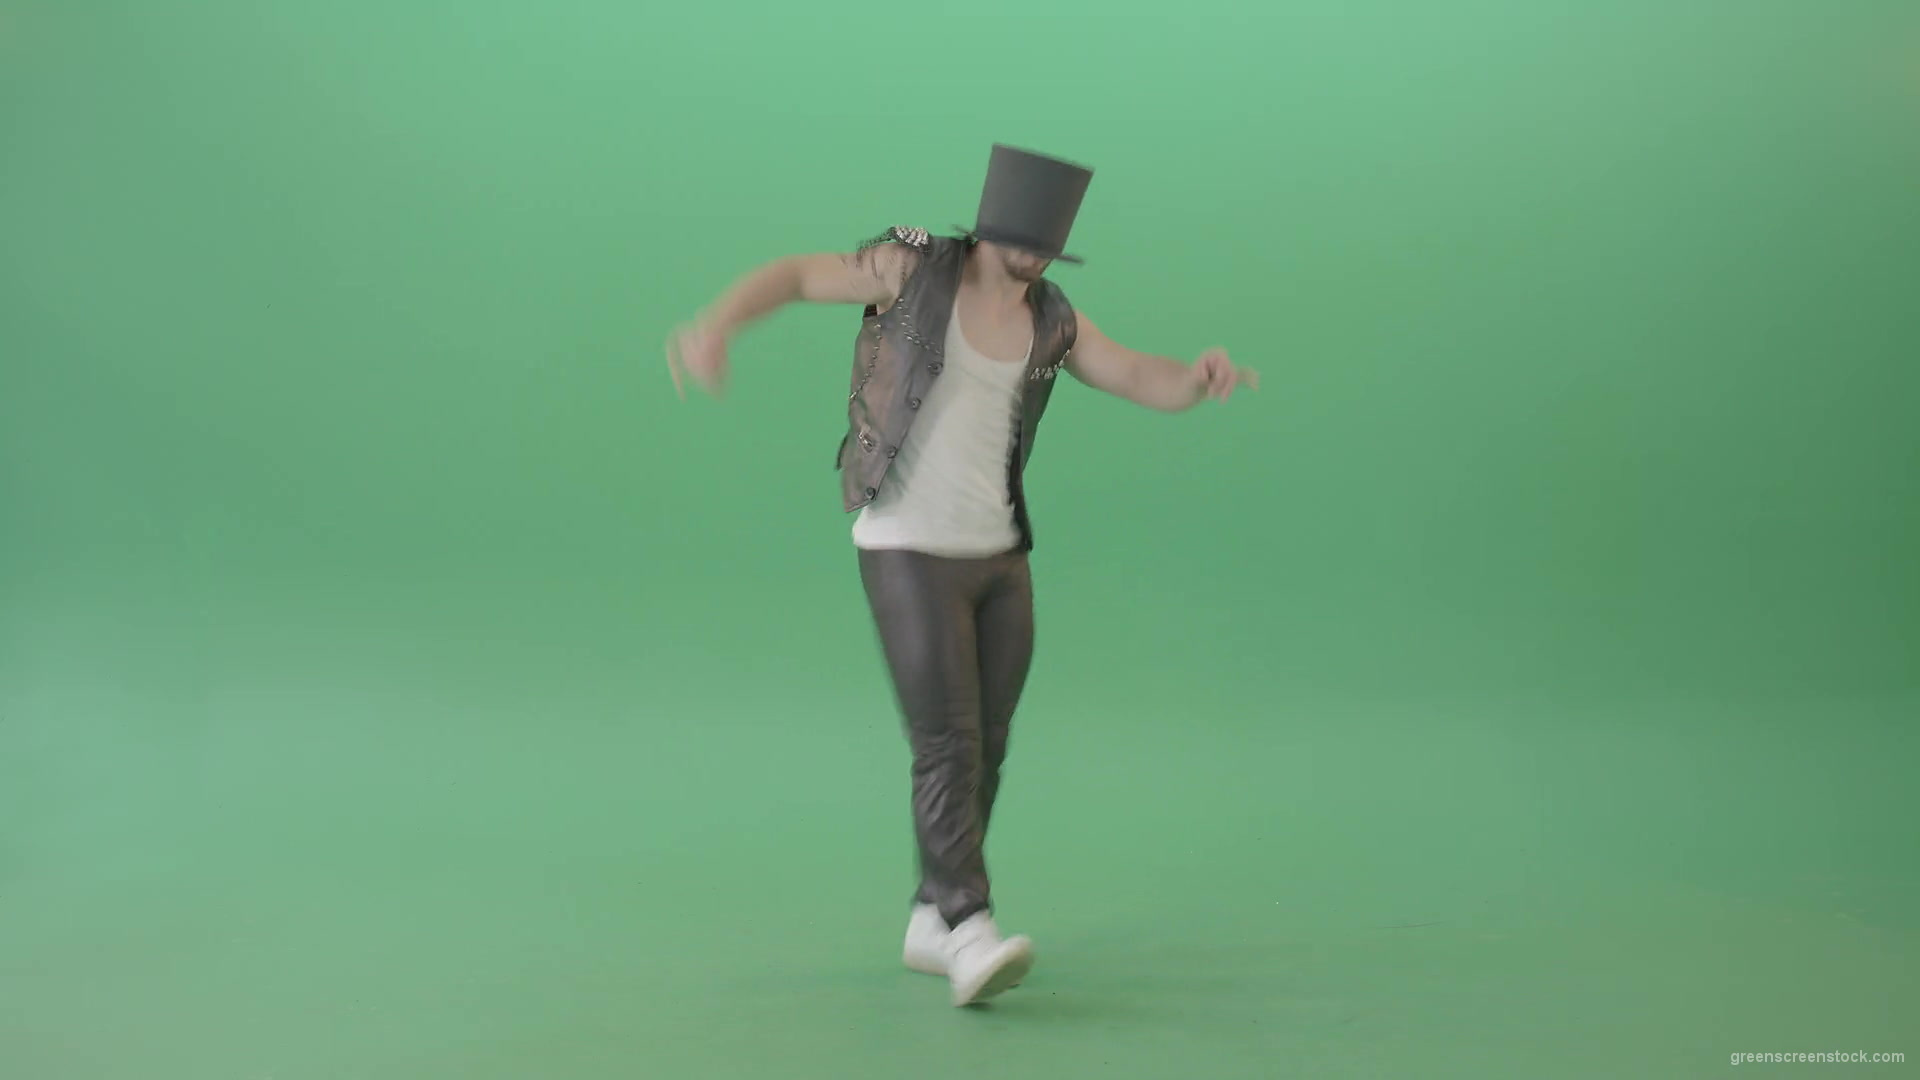 Man-in-black-Busines-Cylinder-Hat-dancing-and-jumping-in-Shuffle-dance-isolated-on-Green-Screen-4K-Video-Footage-1920_005 Green Screen Stock